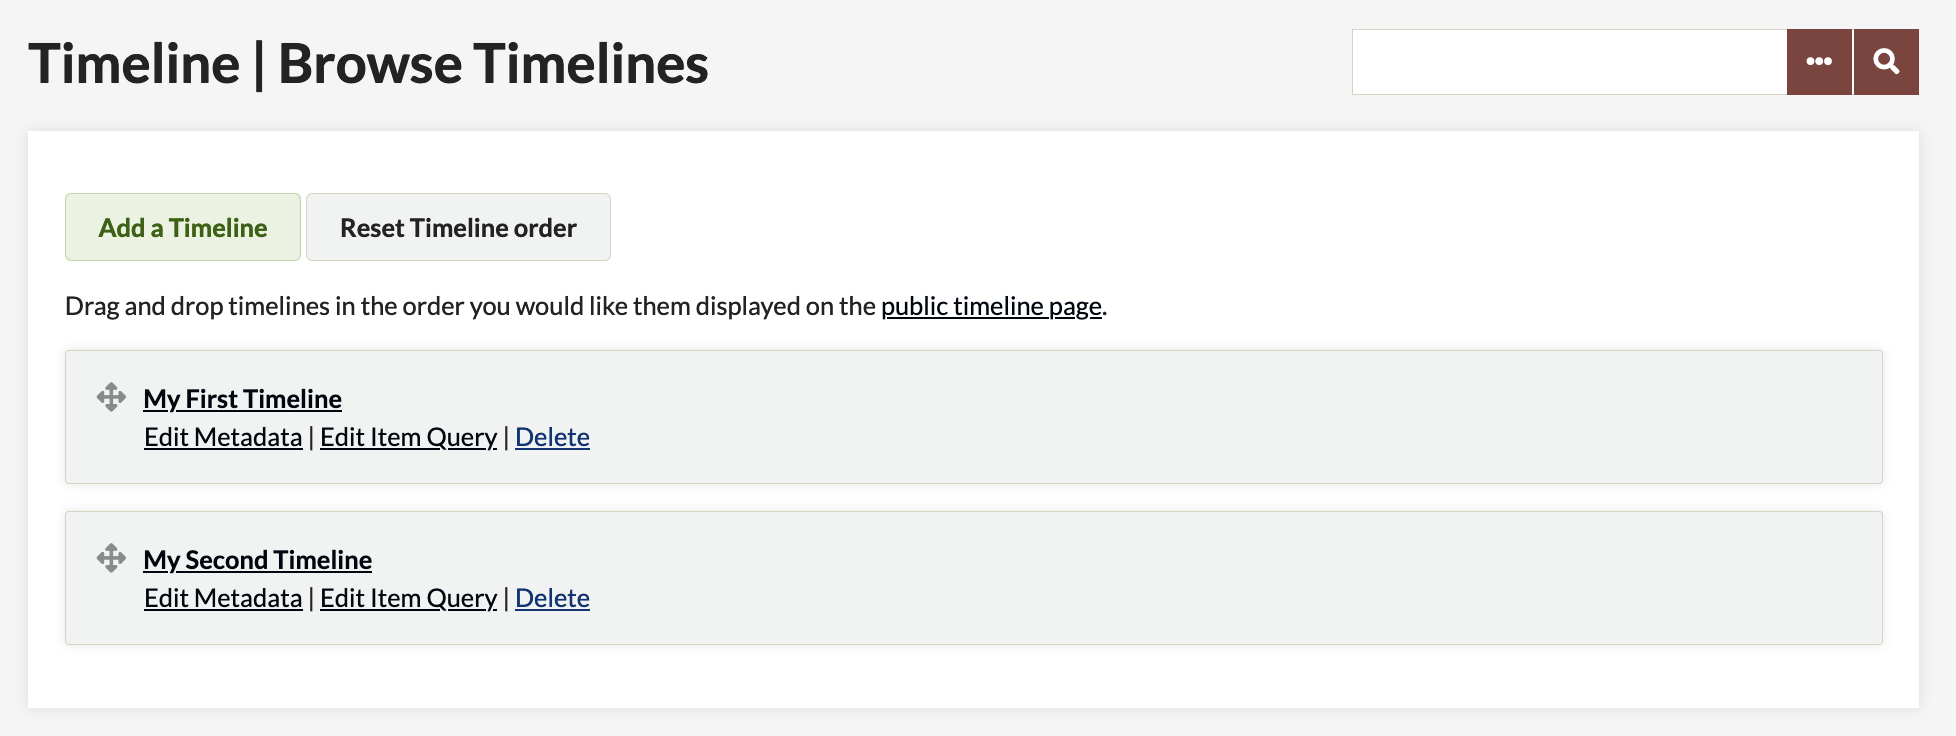 Existing timelines listed on browse timeline page